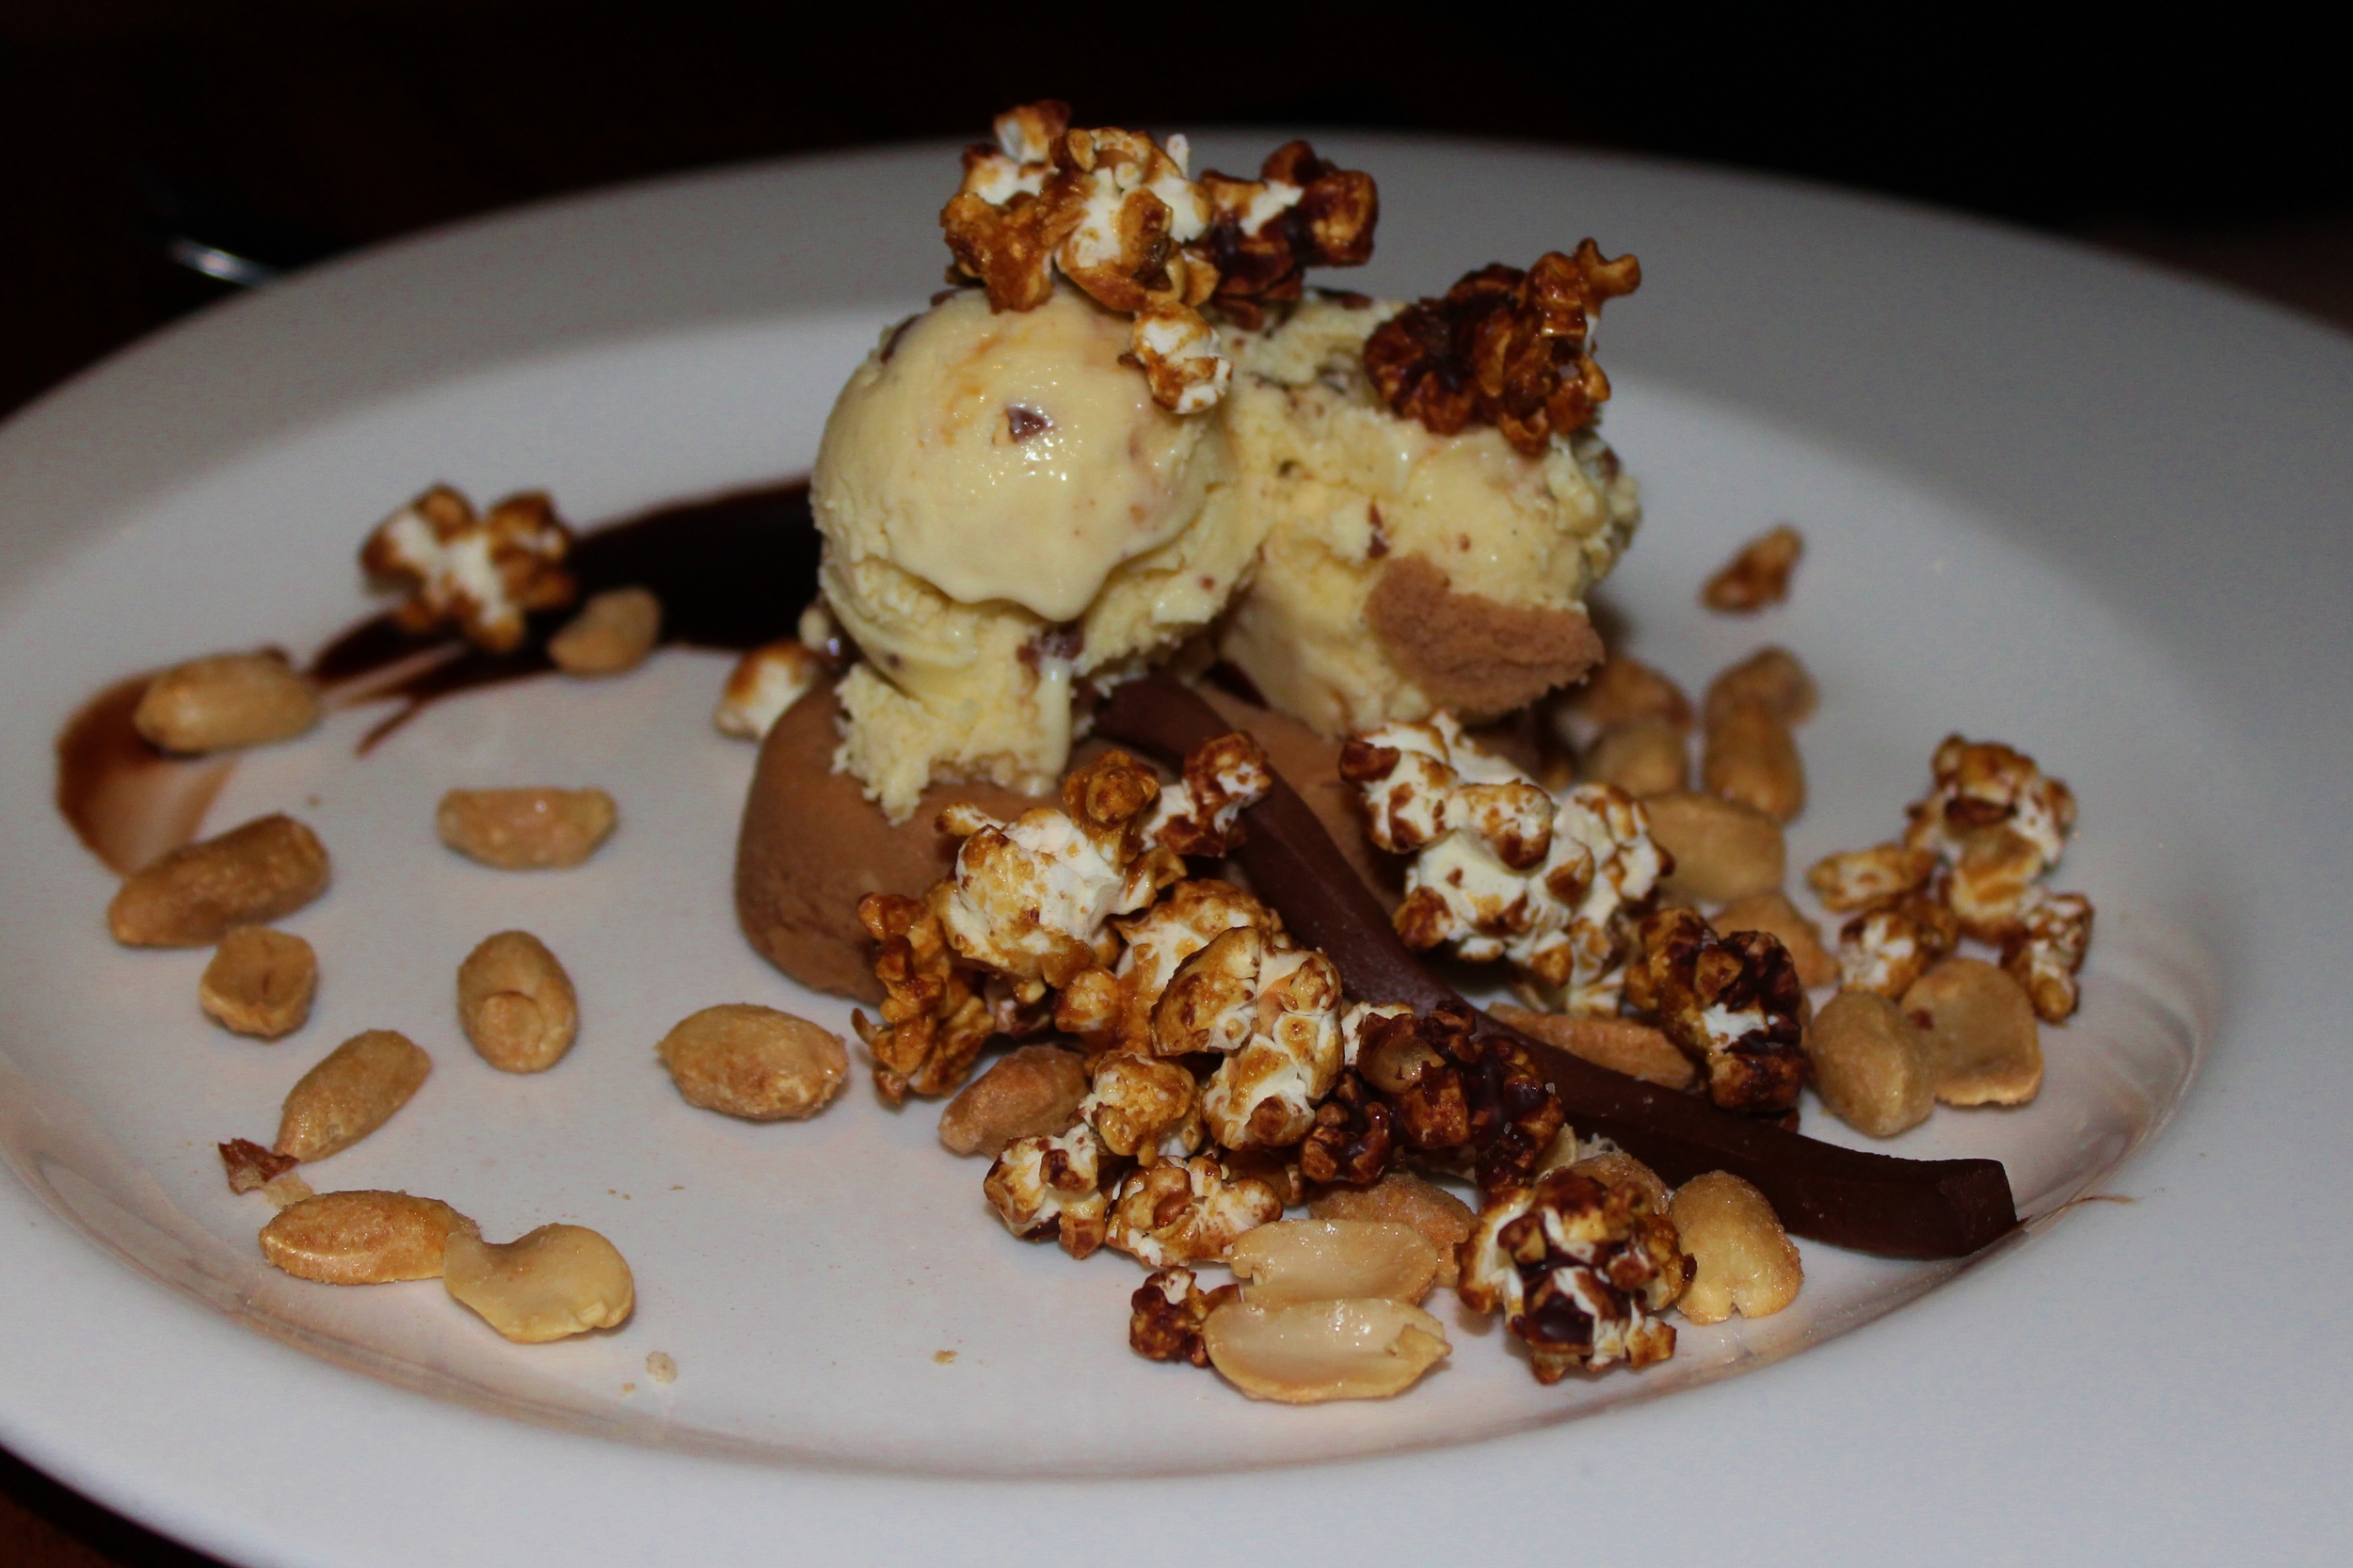  Milk Chocolate Peanut Butter Cheesecake, Candied Peanuts, and Chocolate Popcorn